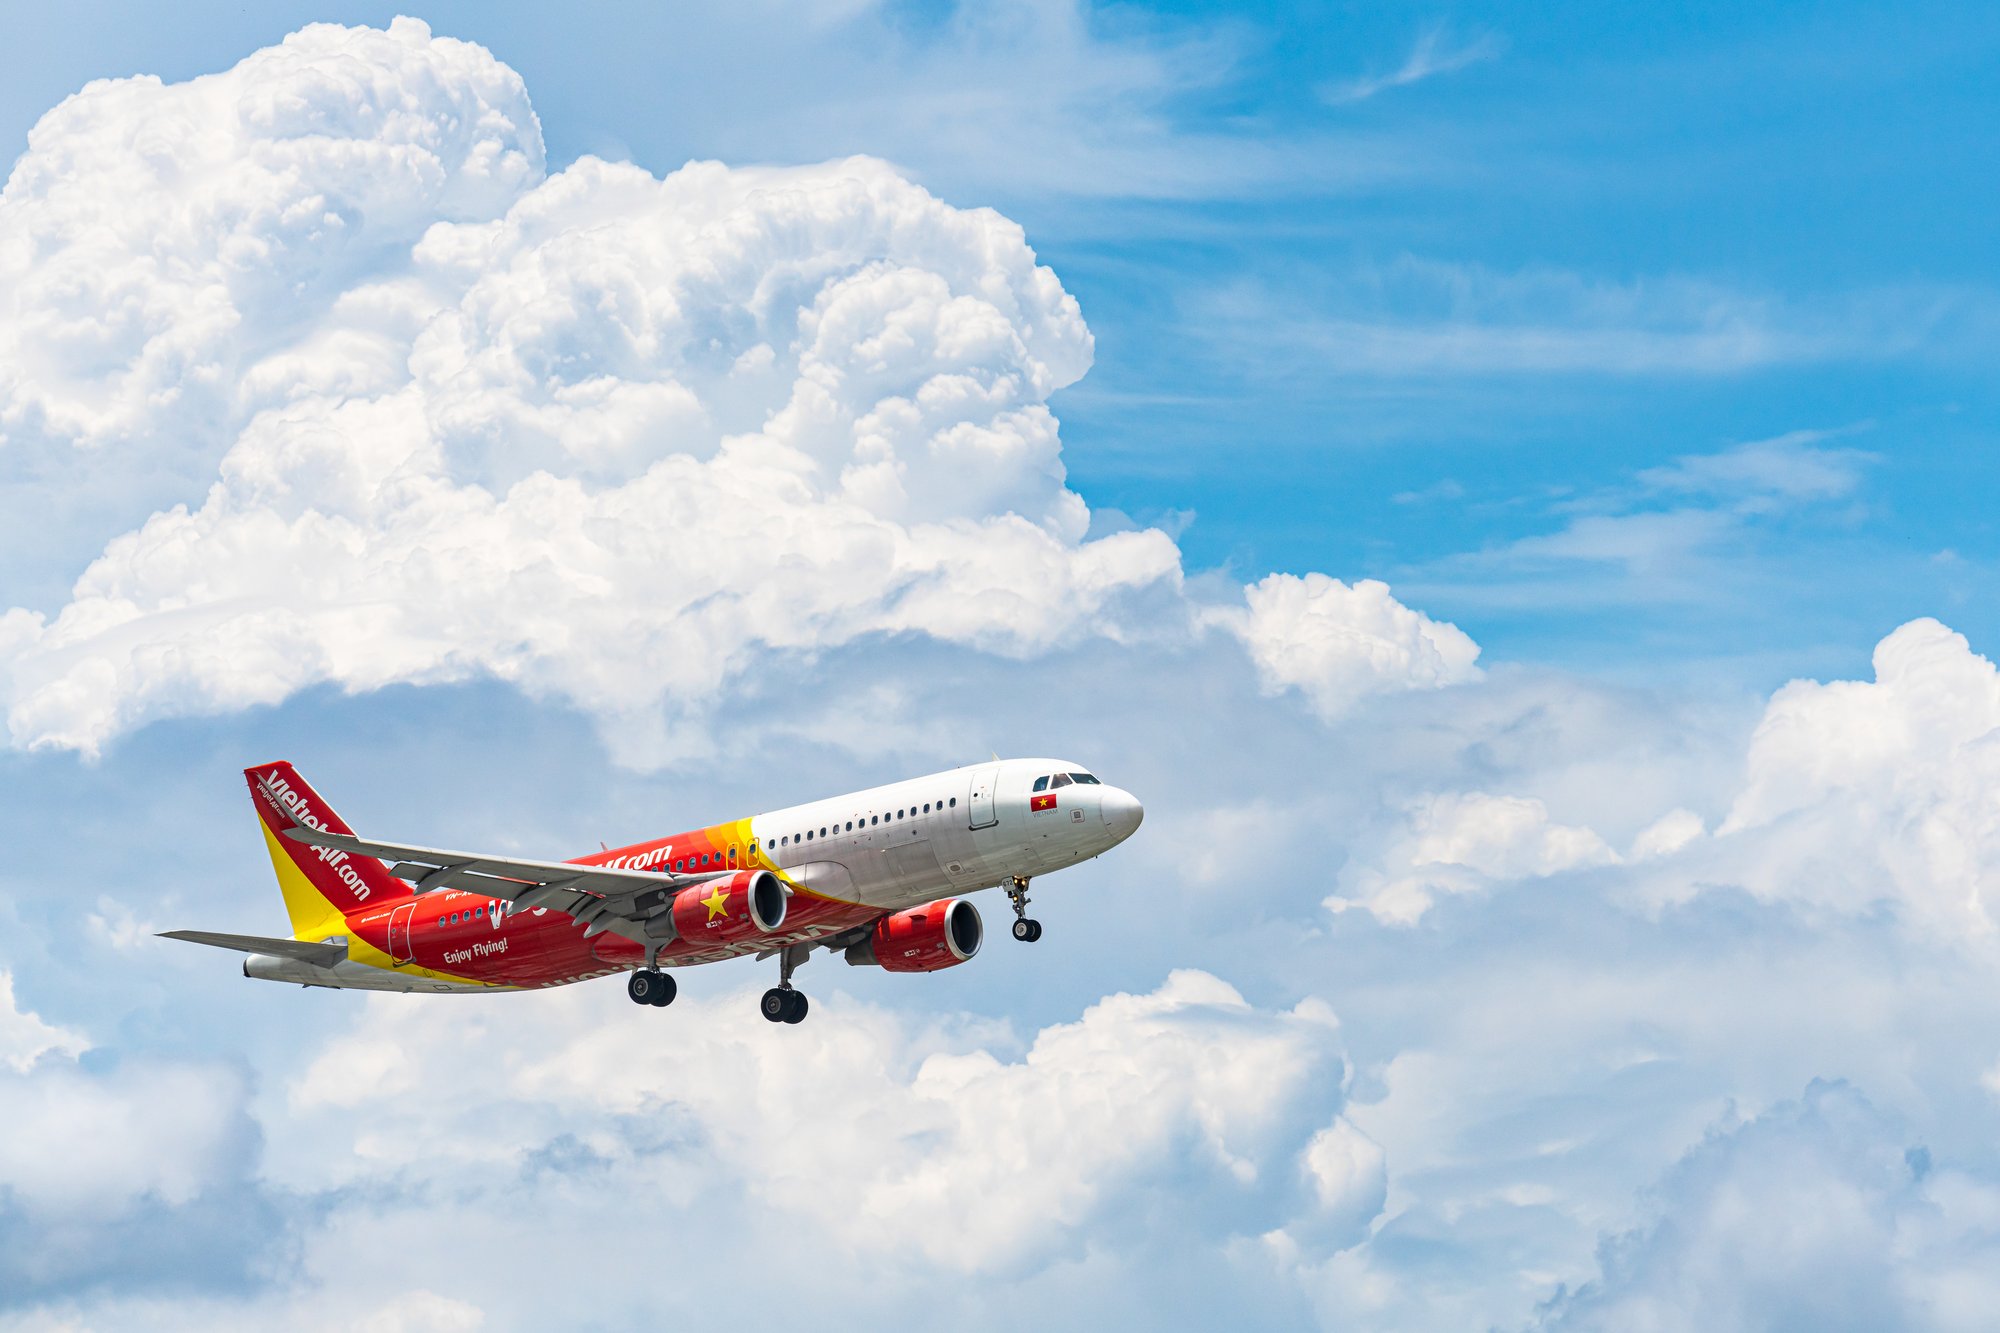 Vietjet Airplane in the sky